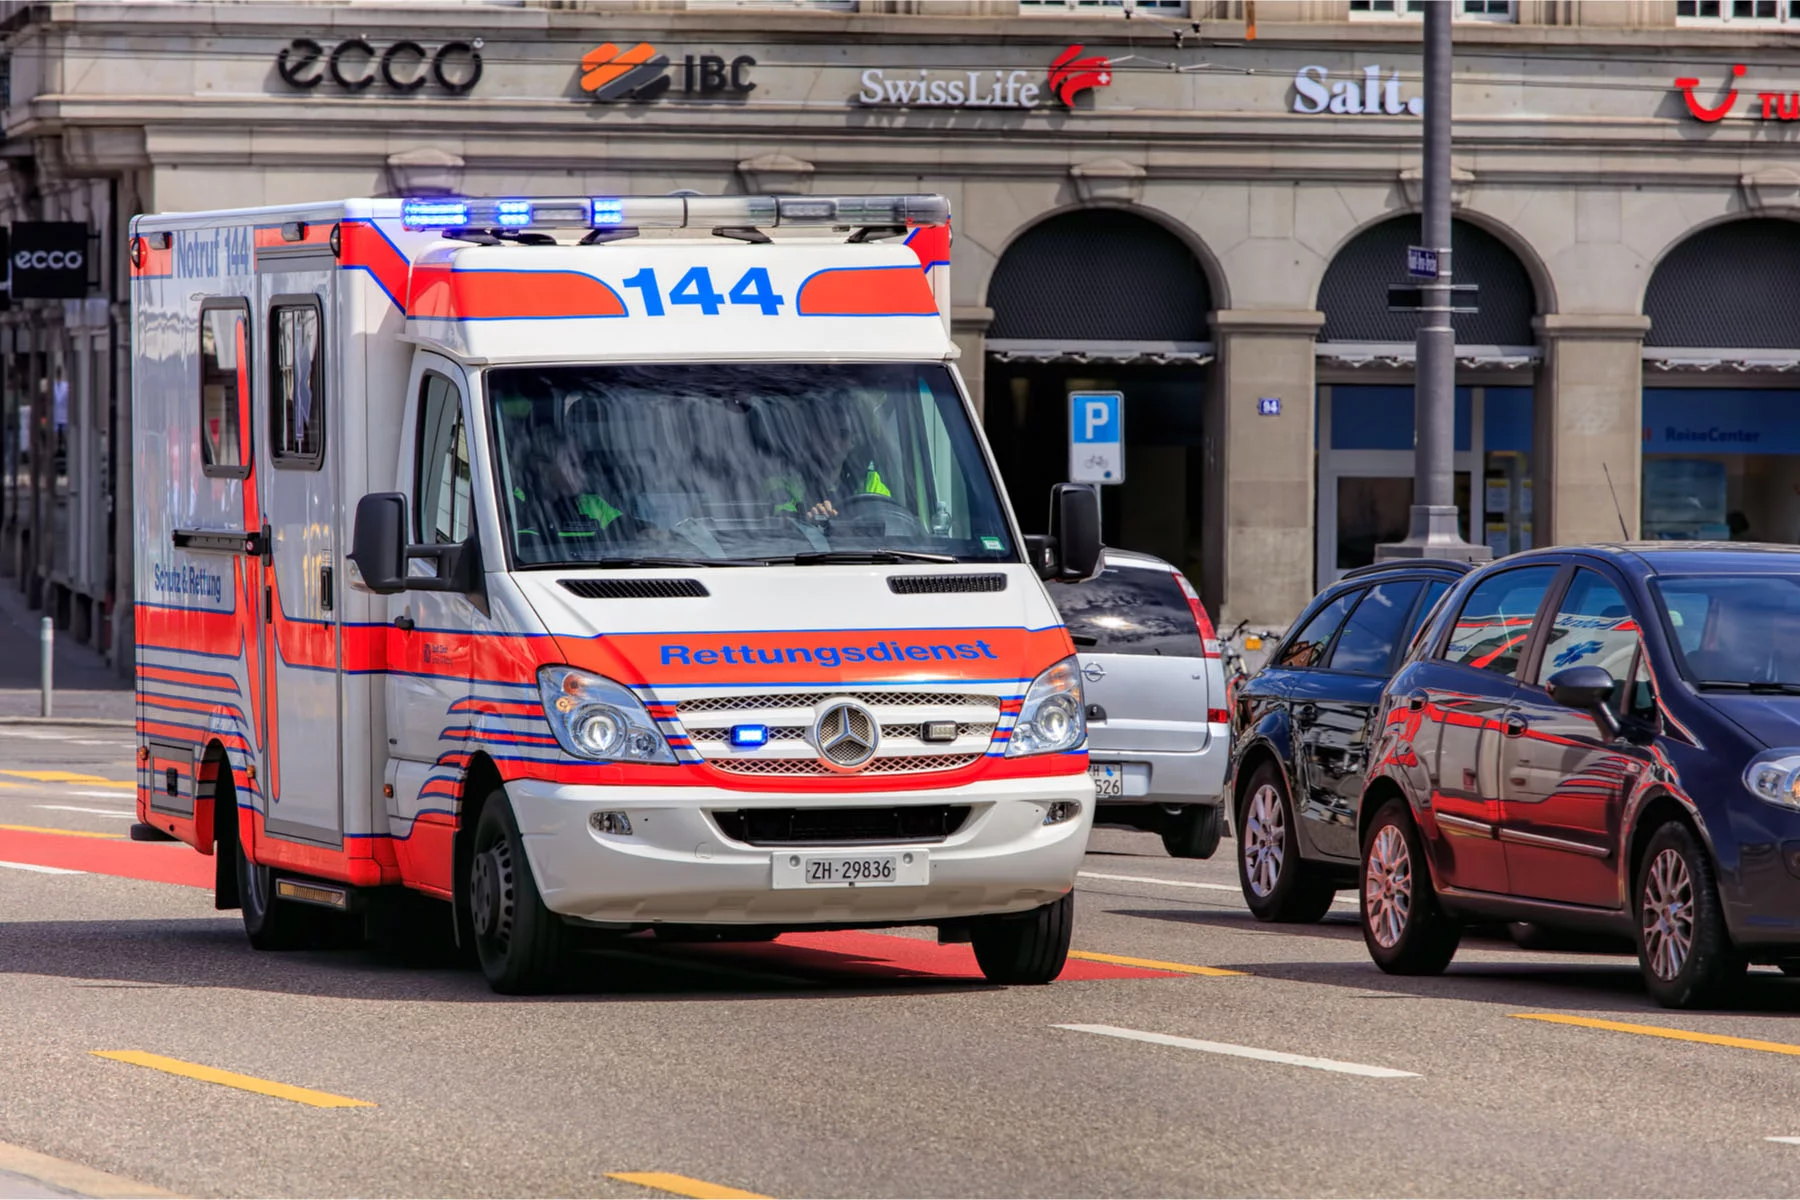 emergency admissions: an ambulance on the road in Zurich, Switzerland